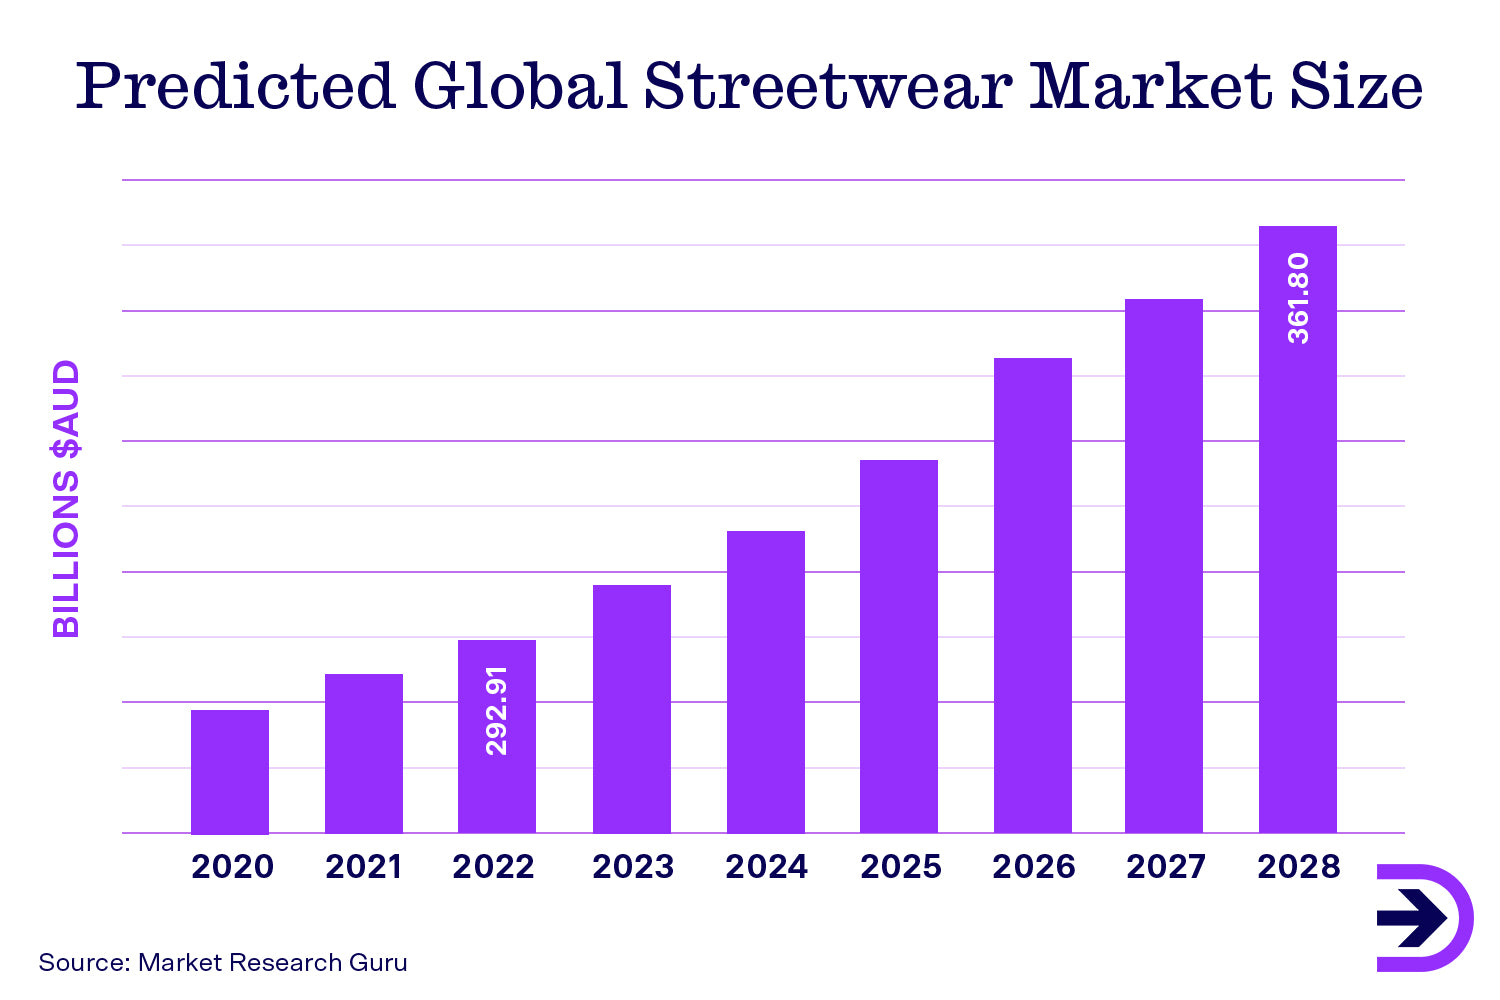 The global streetwear market was valued at AUD 292 billion and is projected to reach around AUD 361 billion in 2028.